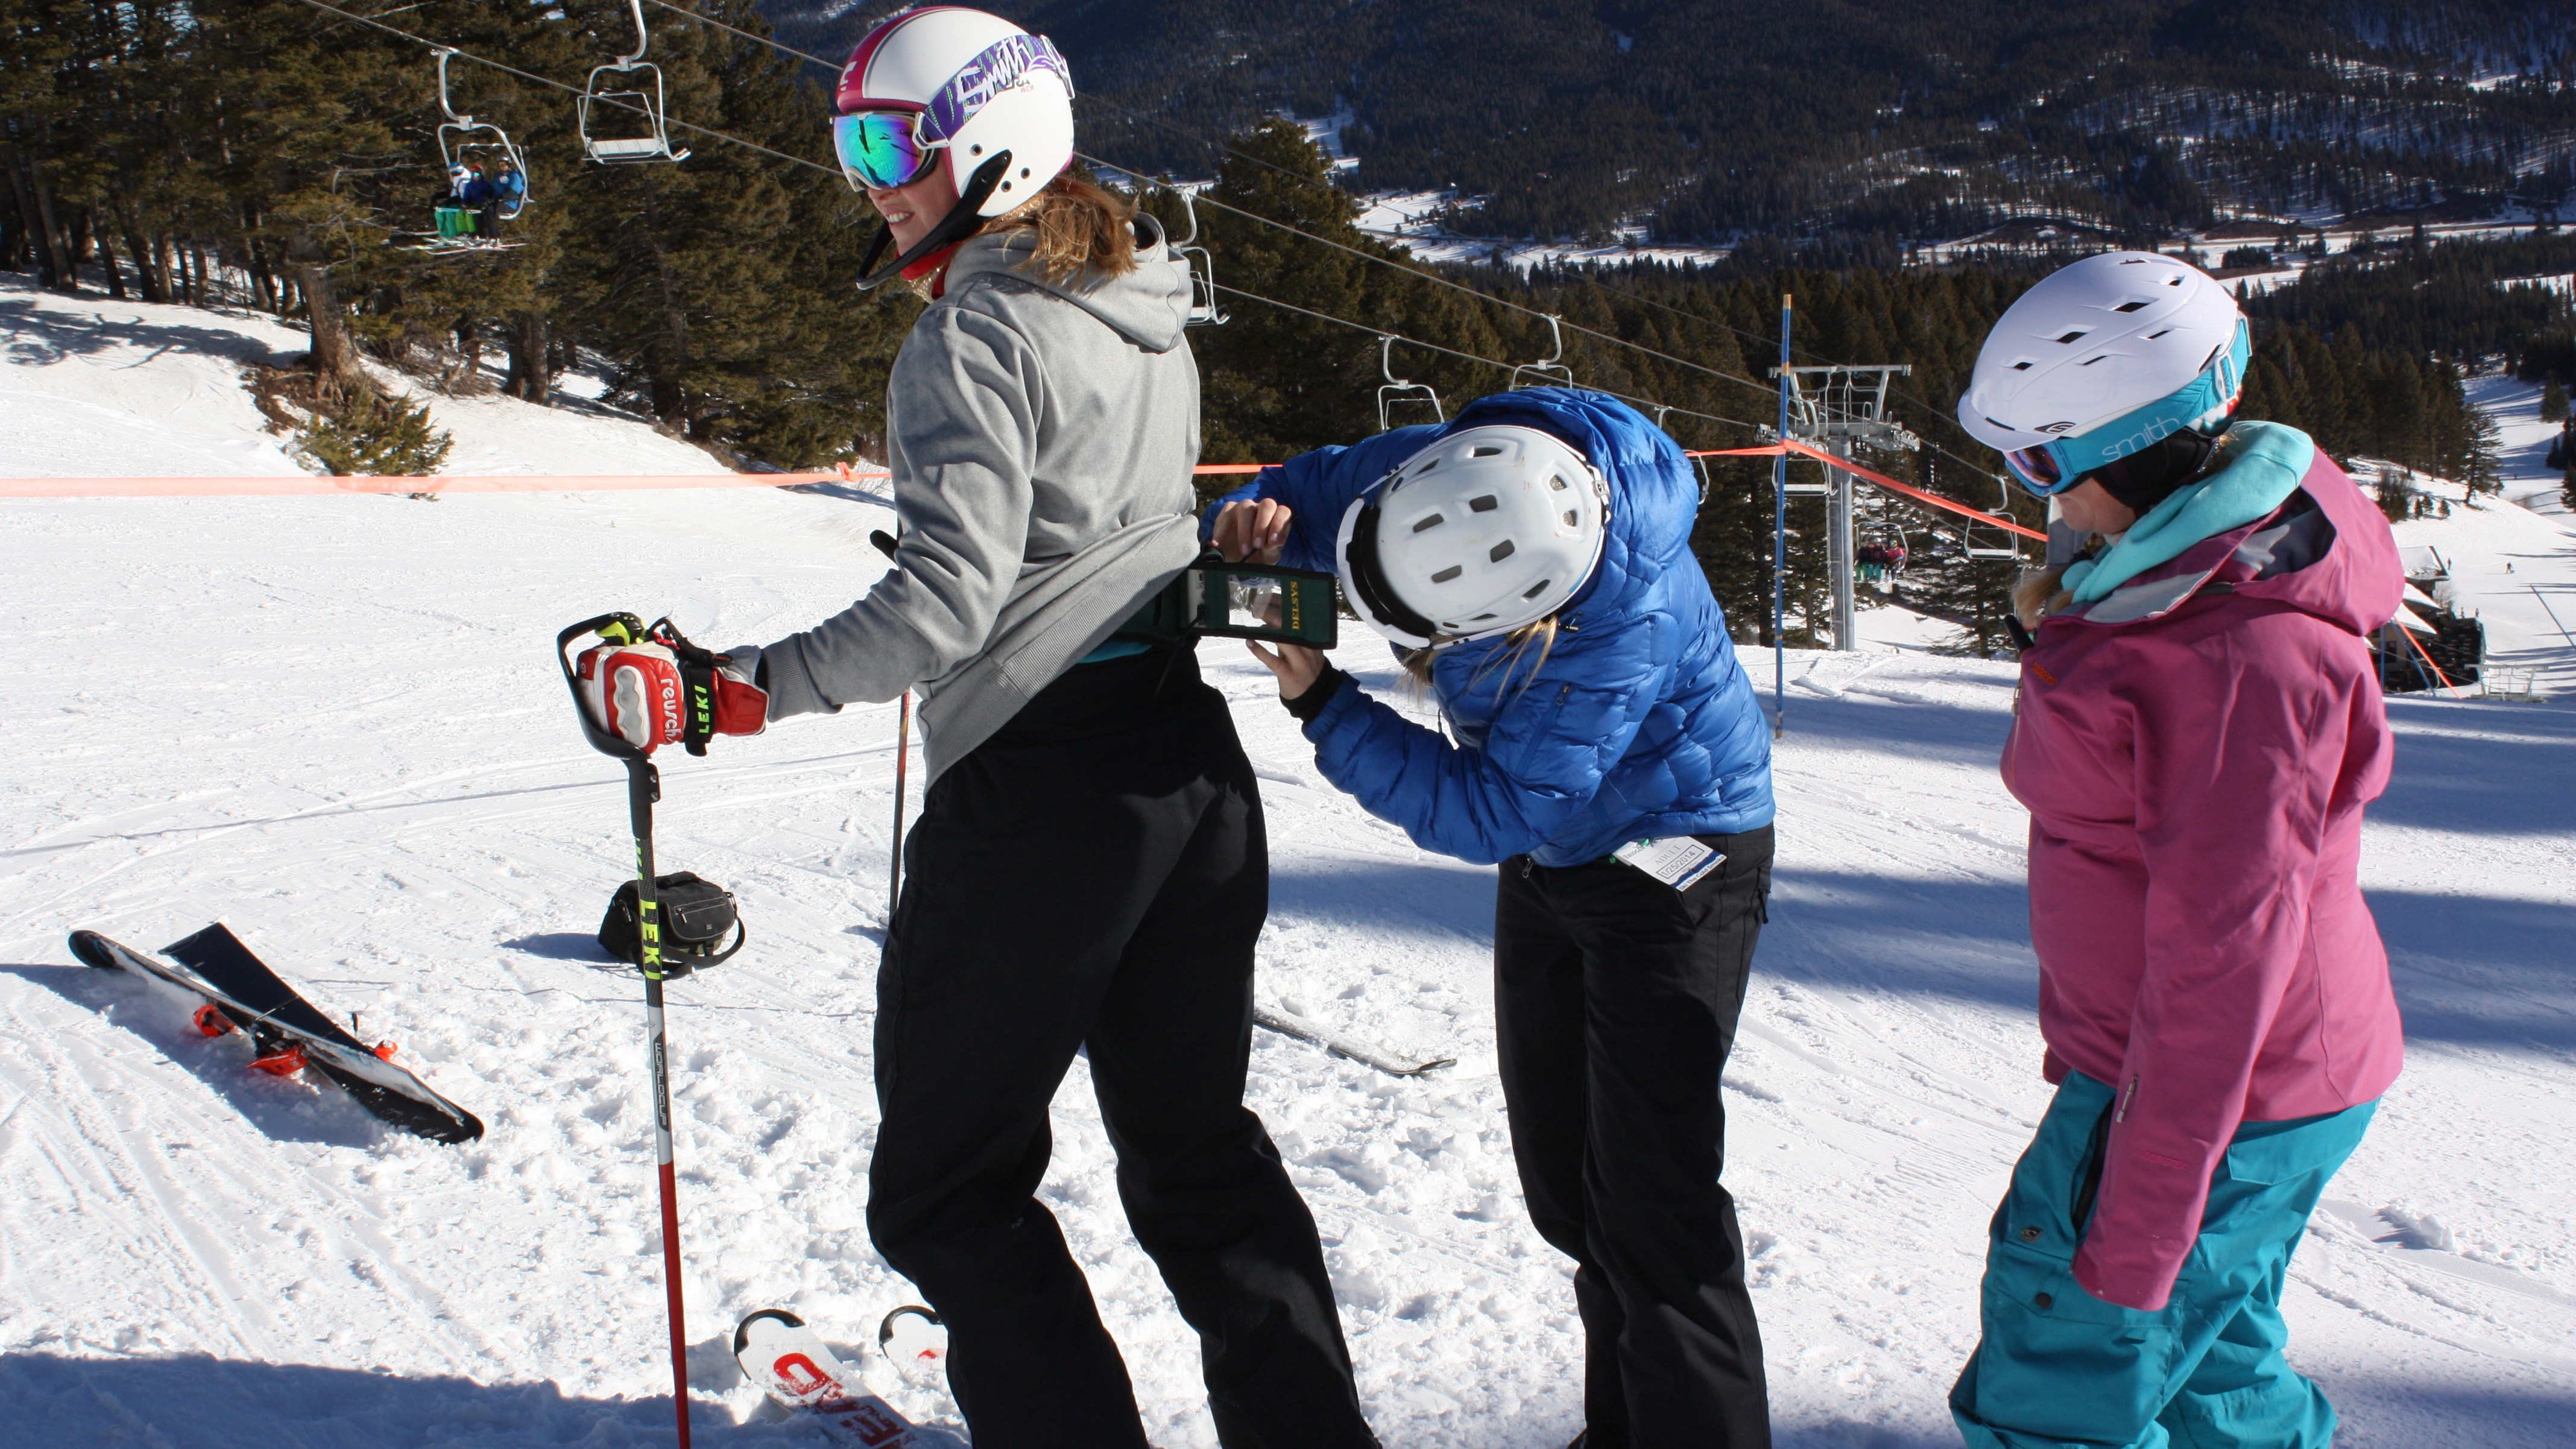 HHD student Shelby Lee Harris conducts Ski Research at Bridger Bowl with US Ski Team